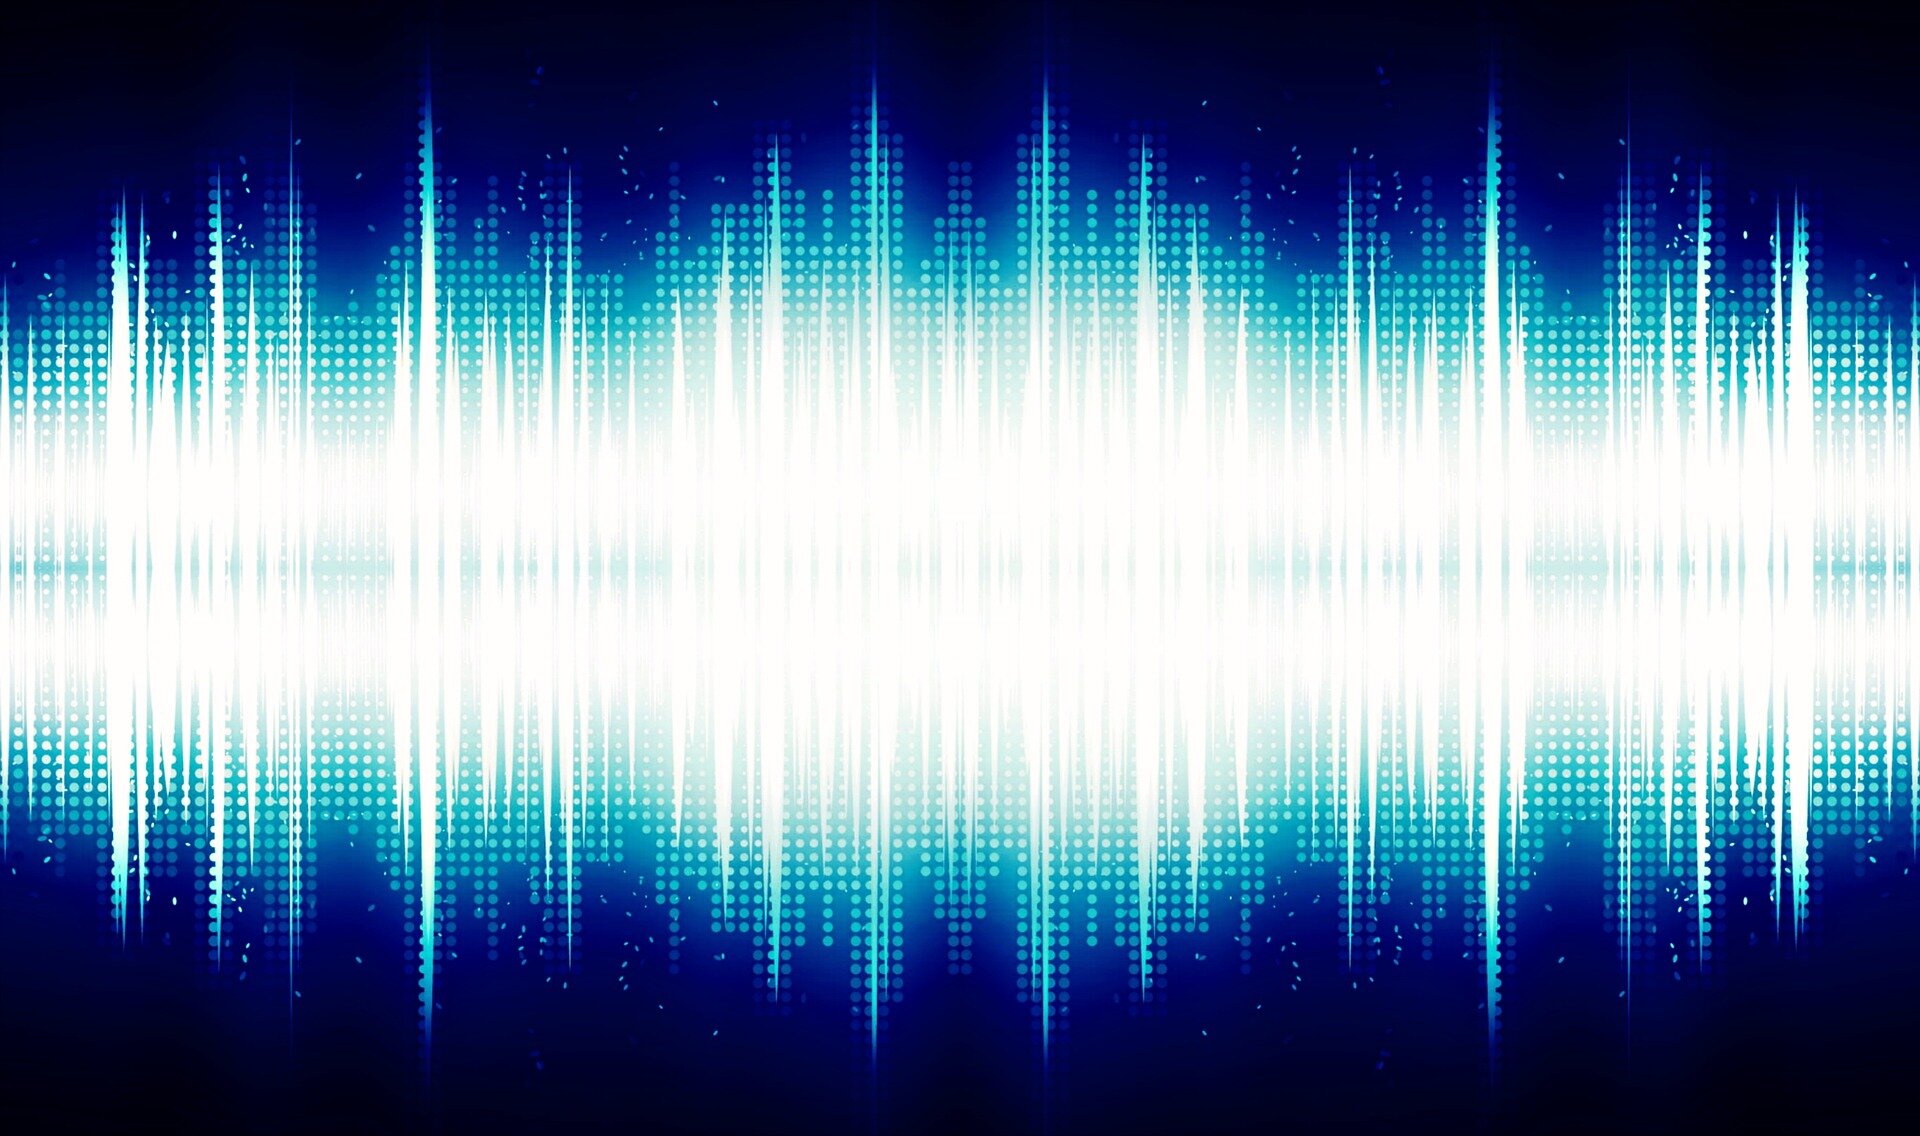 A practical guide for analyzing manipulated audio files